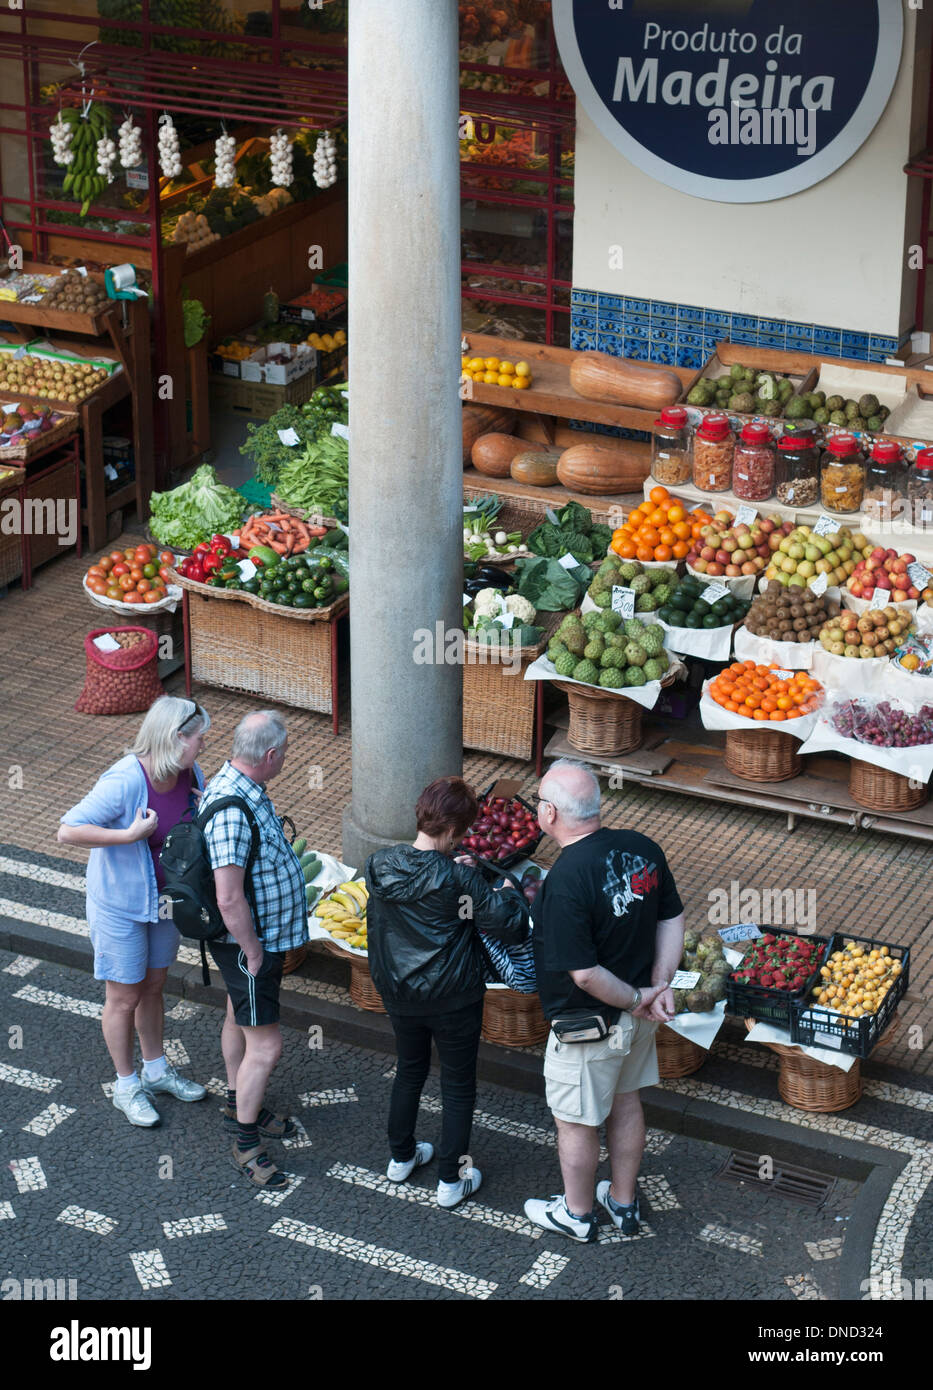 Two couples looking at a fruit/vegetable stall in the Mercado dos Lavradores (Farmer's market) Funchal, Madeira, Portugal Stock Photo